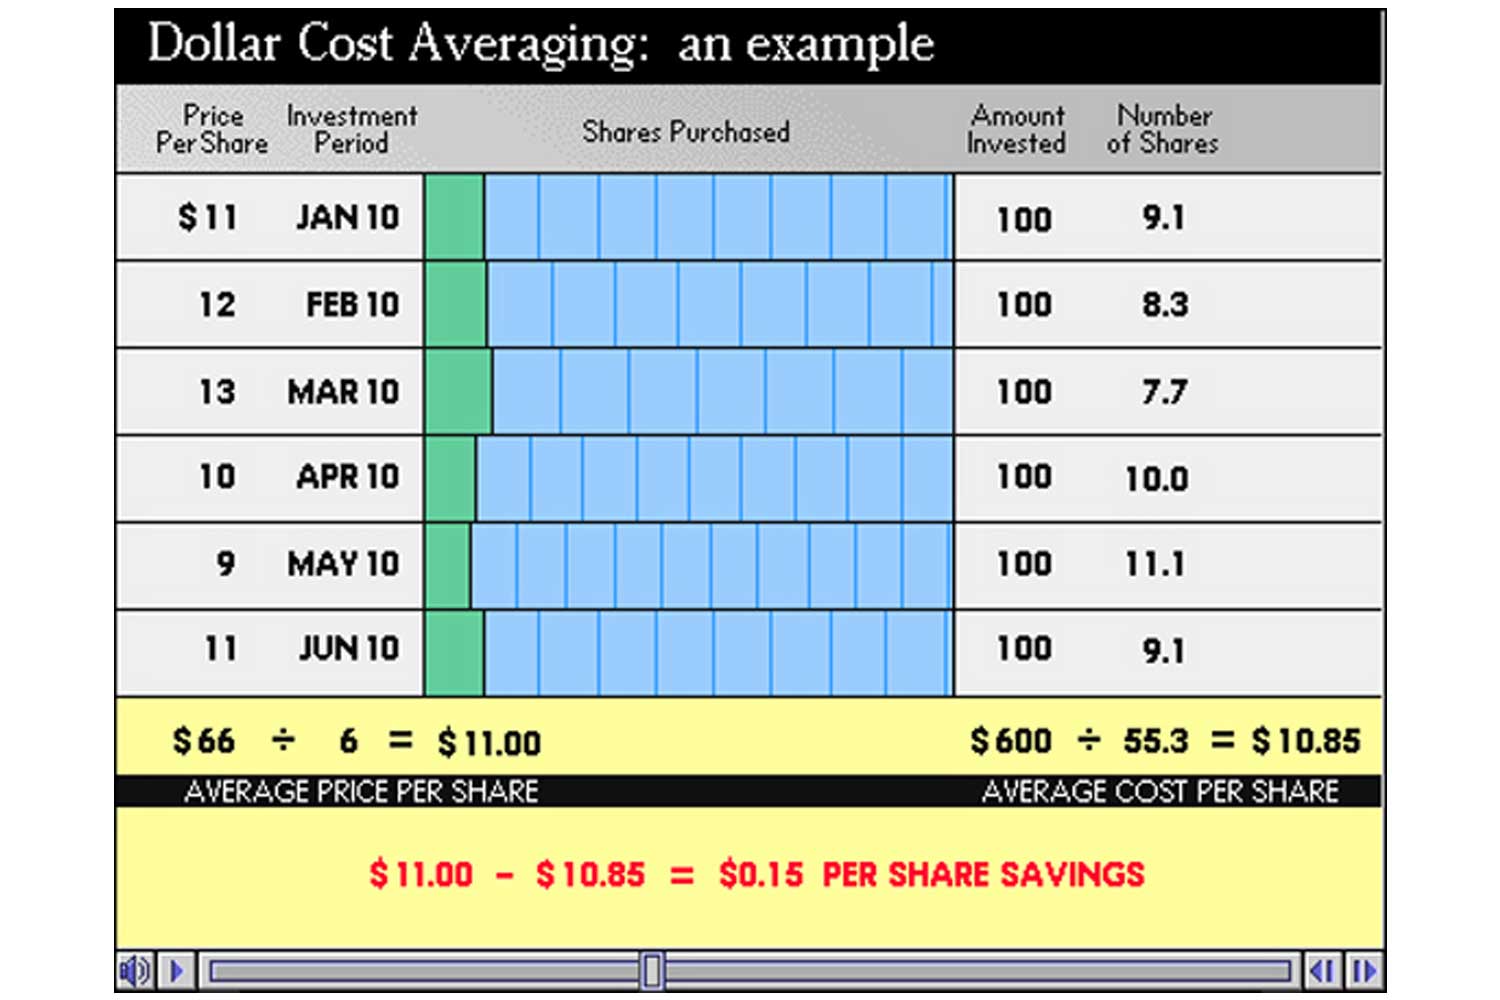  Dollar cost averaging is a strategy to facilitate consistent investment and manage the fluctuating cost of shares over time. This visualization shows how the process works, and the savings that can be achieved. 